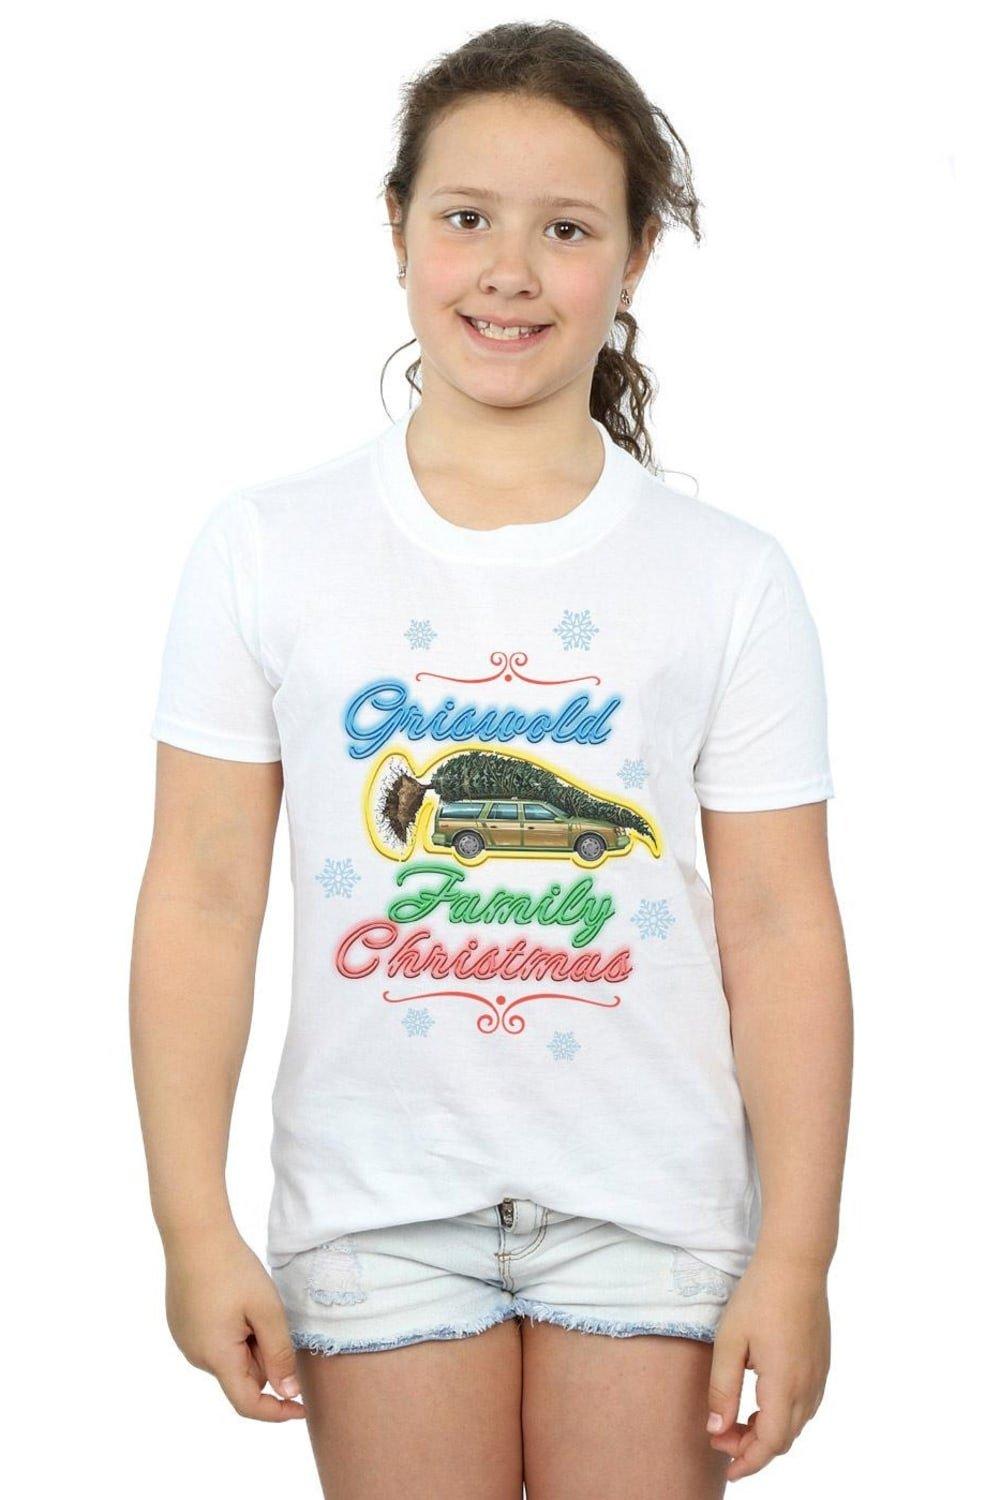 Рождественская хлопковая футболка Griswold Family Family National Lampoon's Christmas Vacation, белый family shirts word 2 your mother tee family trip matching 2021 shirt newborn baby bodysuits family vacation tee